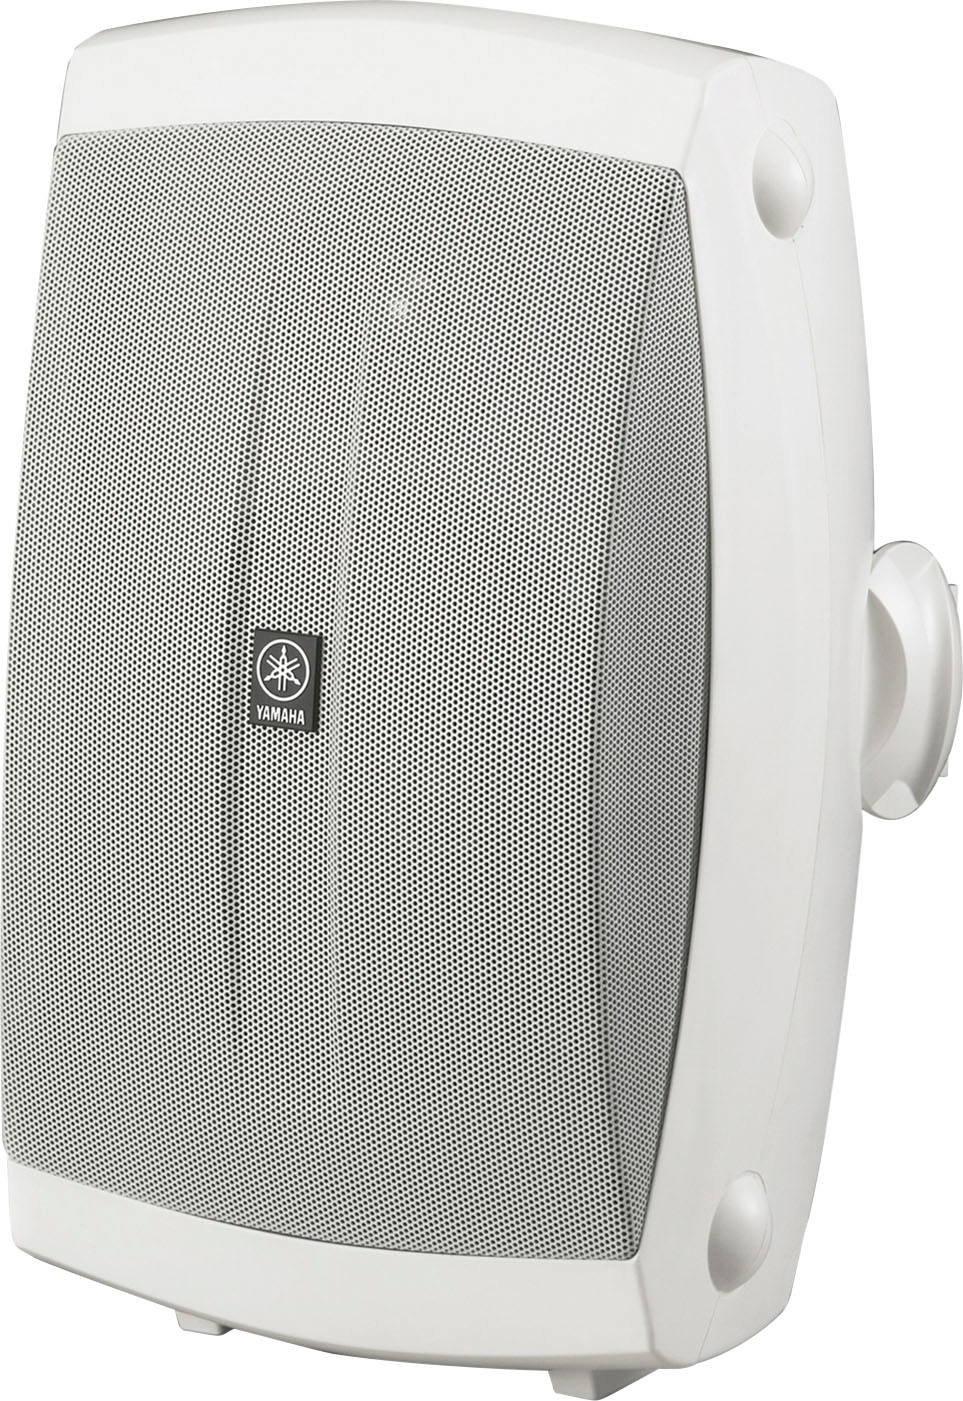 Angle View: Yamaha - 2-Way High-Performance Wall-Mount Outdoor Speakers - White